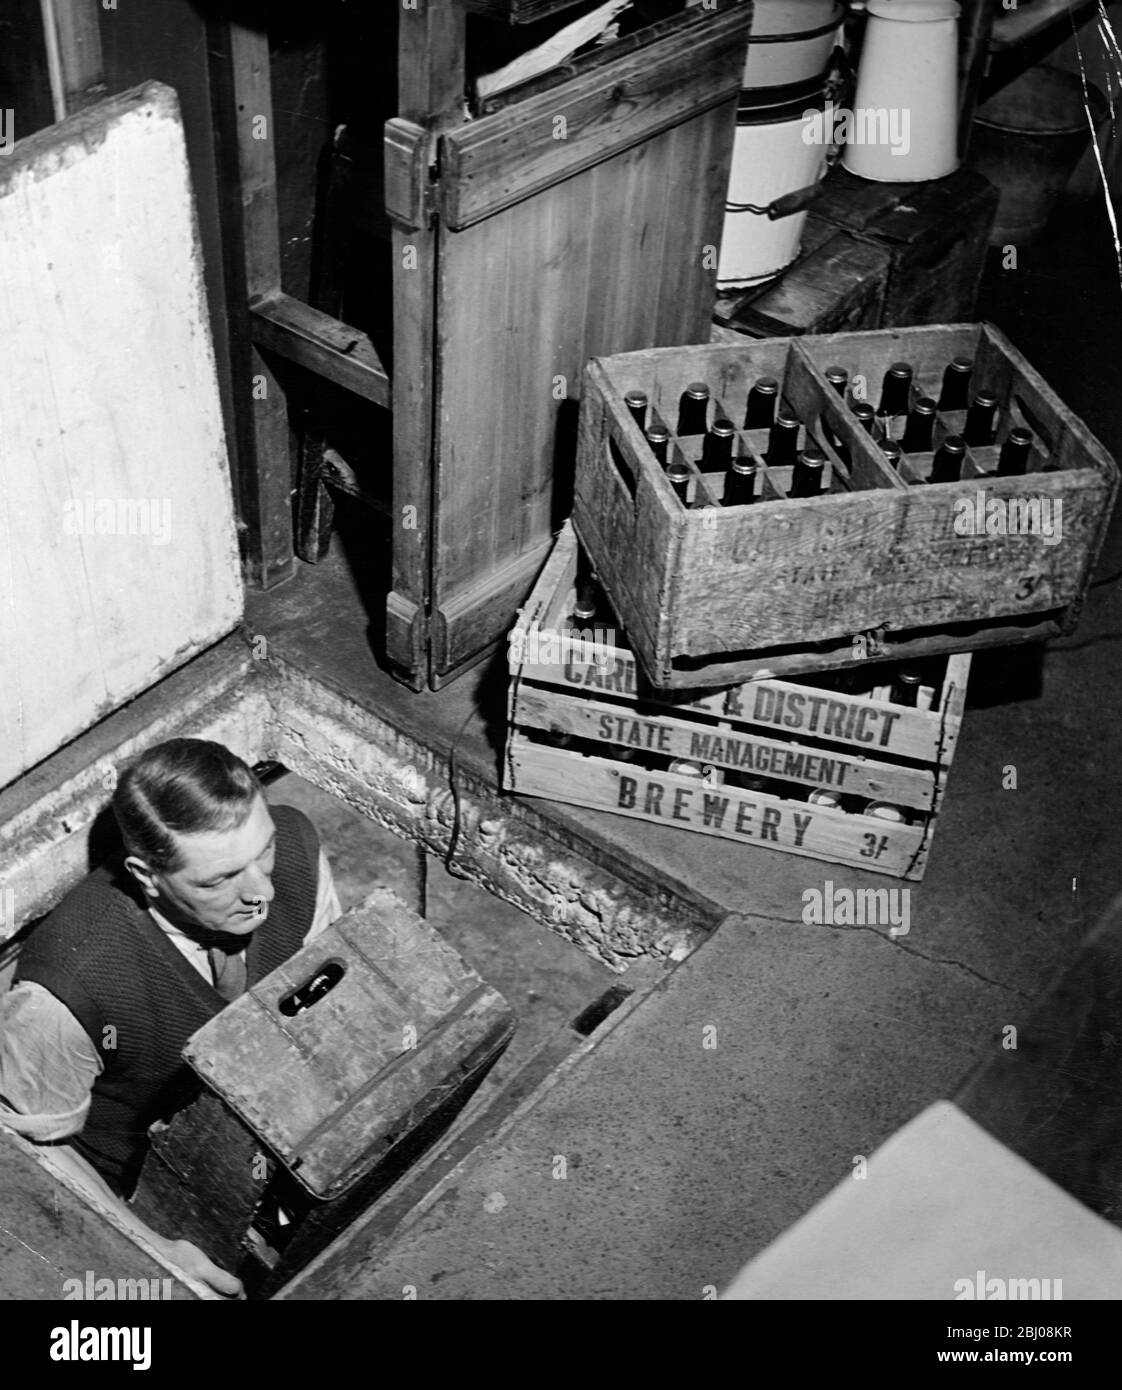 Joe, the landlord, brings up bottles of beer from the cellar to sell at the Globe Tavern. A state owned pub in Longtown, Carlisle, Cumbria, England. - December 1948 Stock Photo